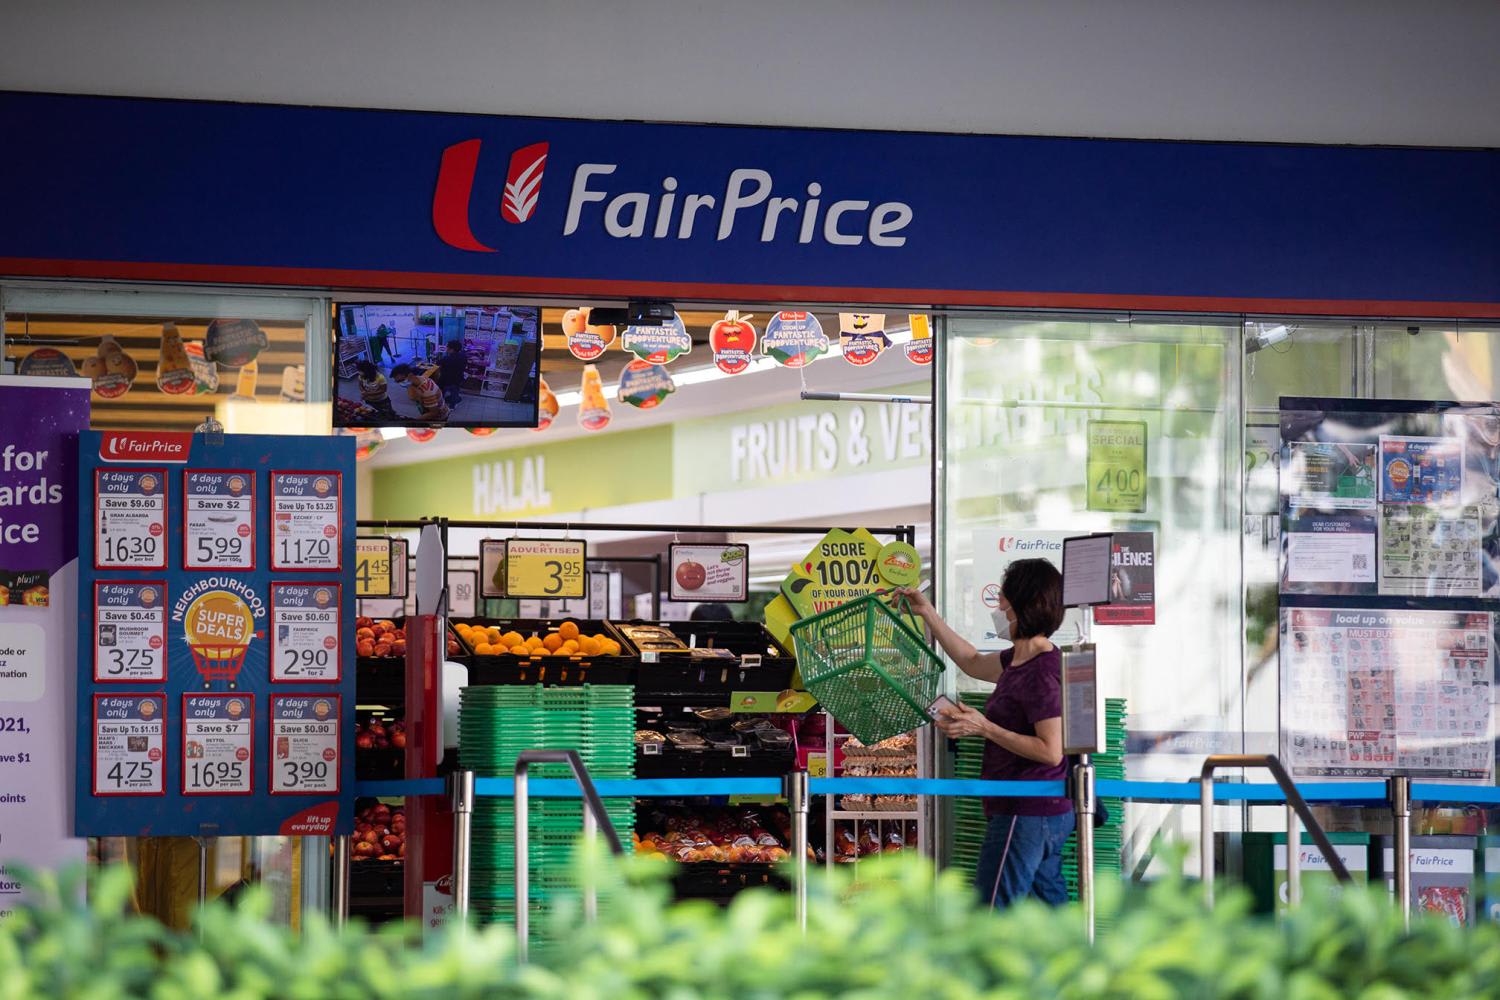 Items at NTUC FairPrice supermarkets that will be offered at 1 per cent discount will include essential buys such as fresh fruits, vegetables, meats and household cleaners.